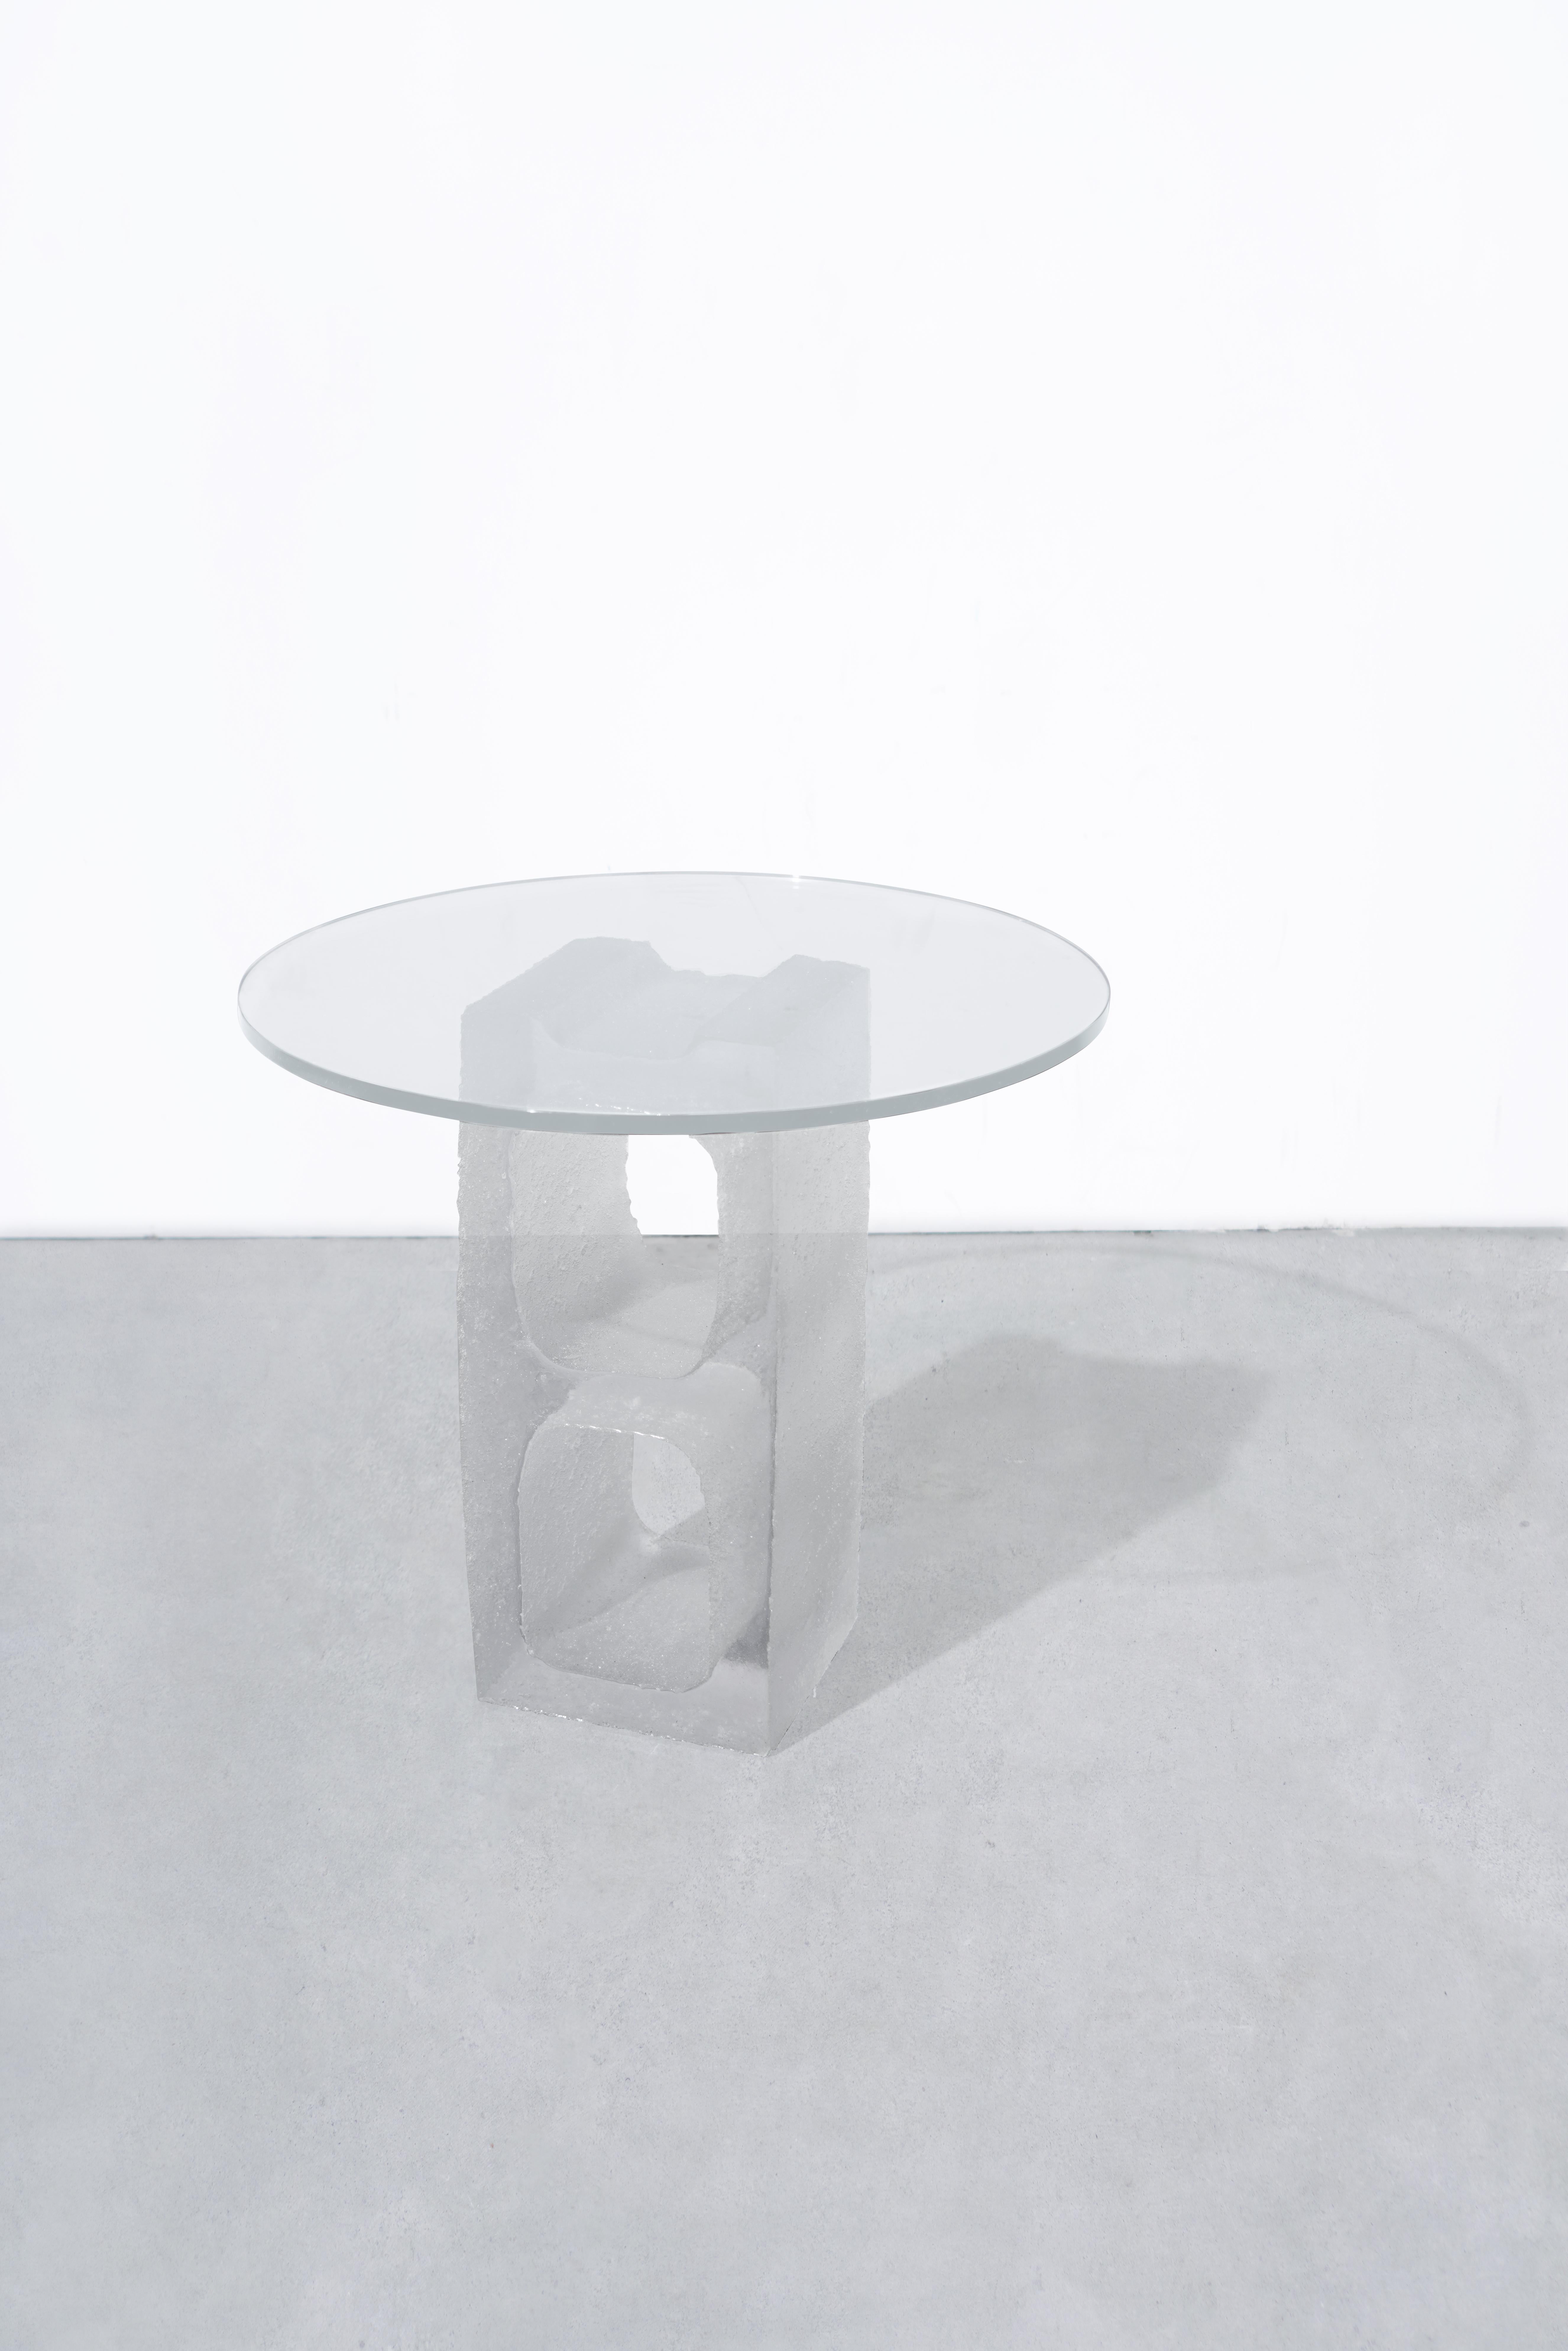 Description
1 Hand-molded, transparent resin cinder block, supporting a tempered glass table top.
Starphire glass top.
Modular.
Made to order in nyc.

Dimension
Cinder block length 18.75?
Cinder block width 7.5” 
Cinder block thickness